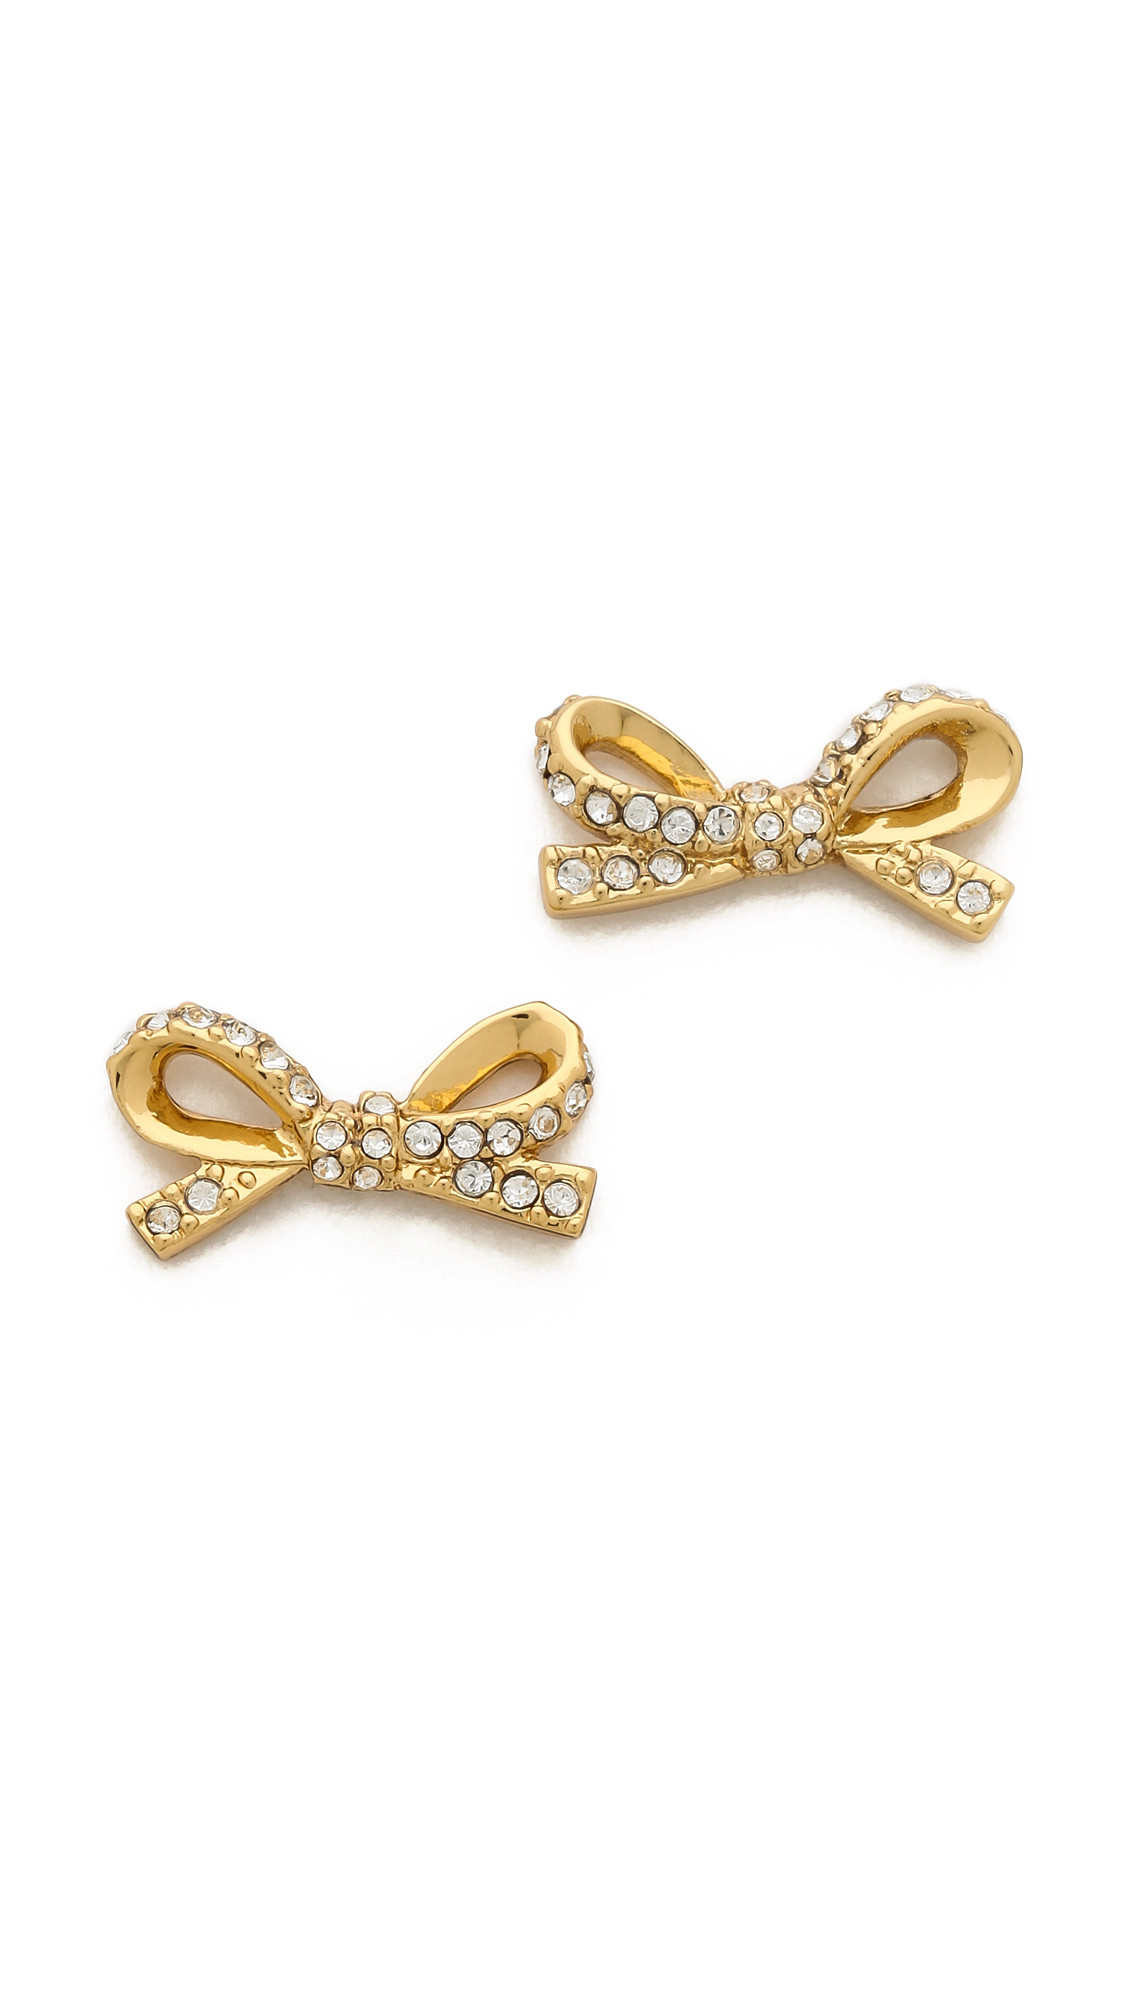 Gold Bow Earrings
 Kate Spade Skinny Mini Pave Bow Stud Earrings in Gold